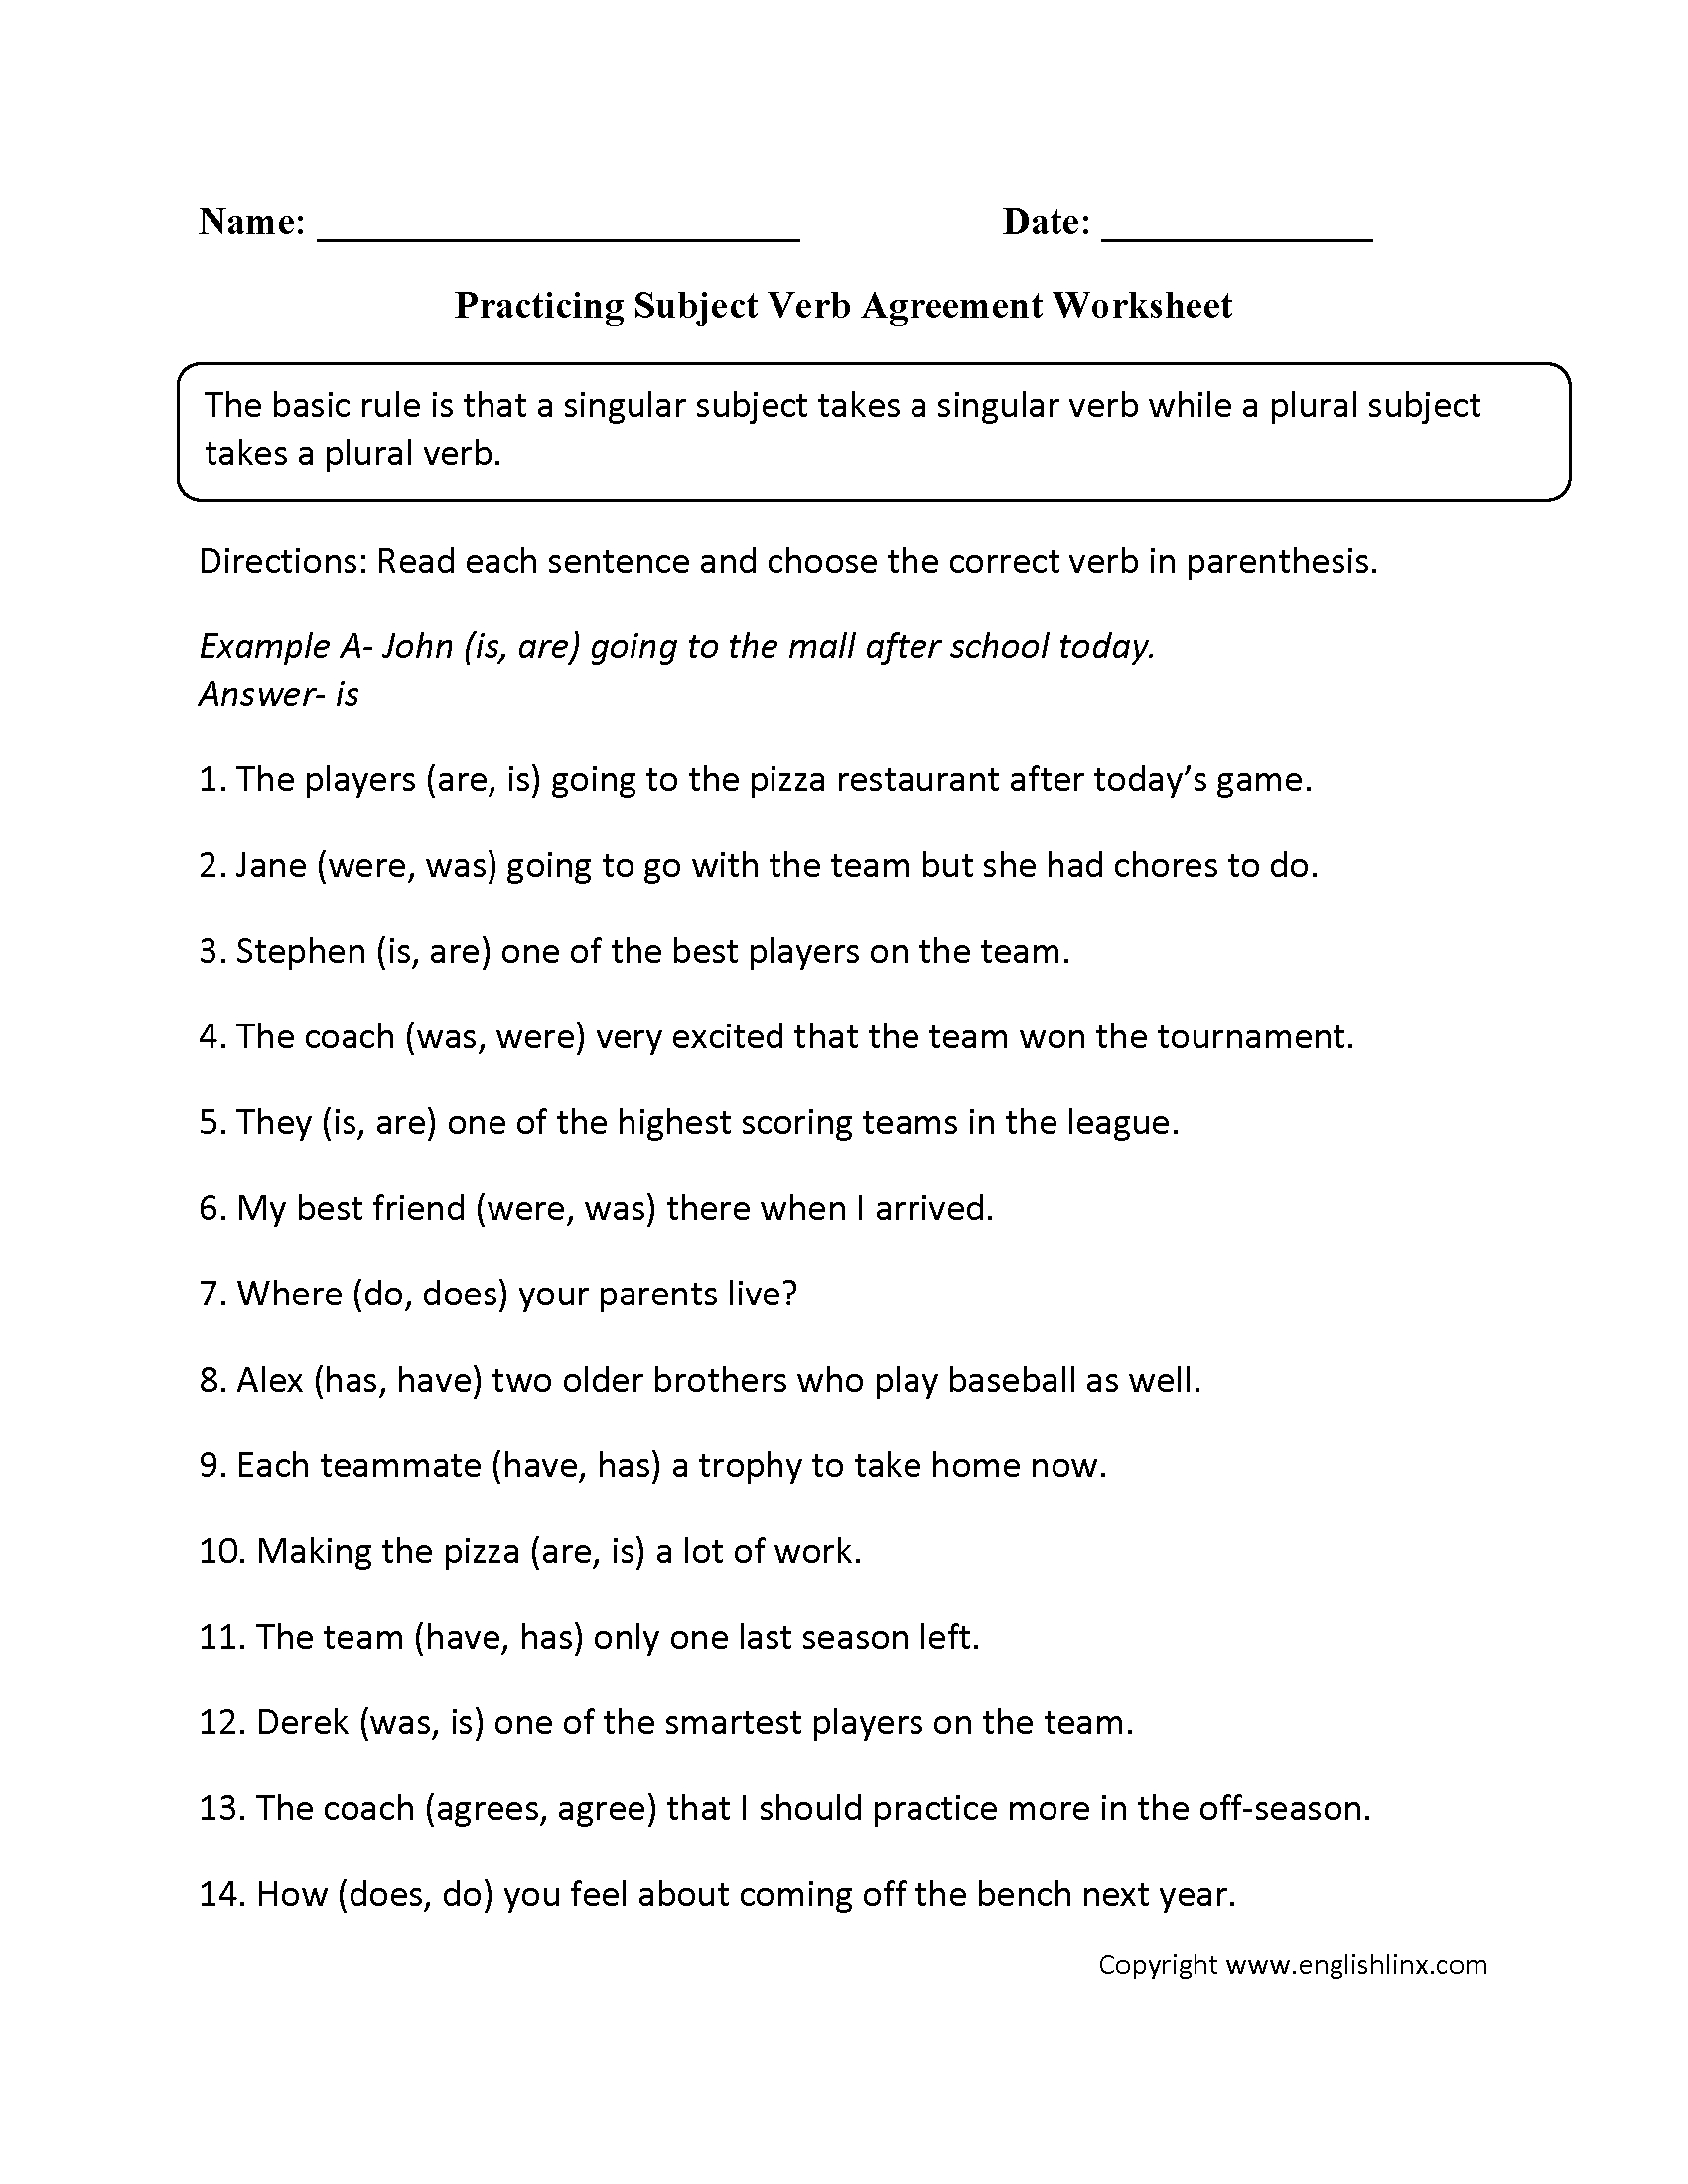 Subject Of Verb Agreement Word Usage Worksheets Subject Verb Agreement Worksheets